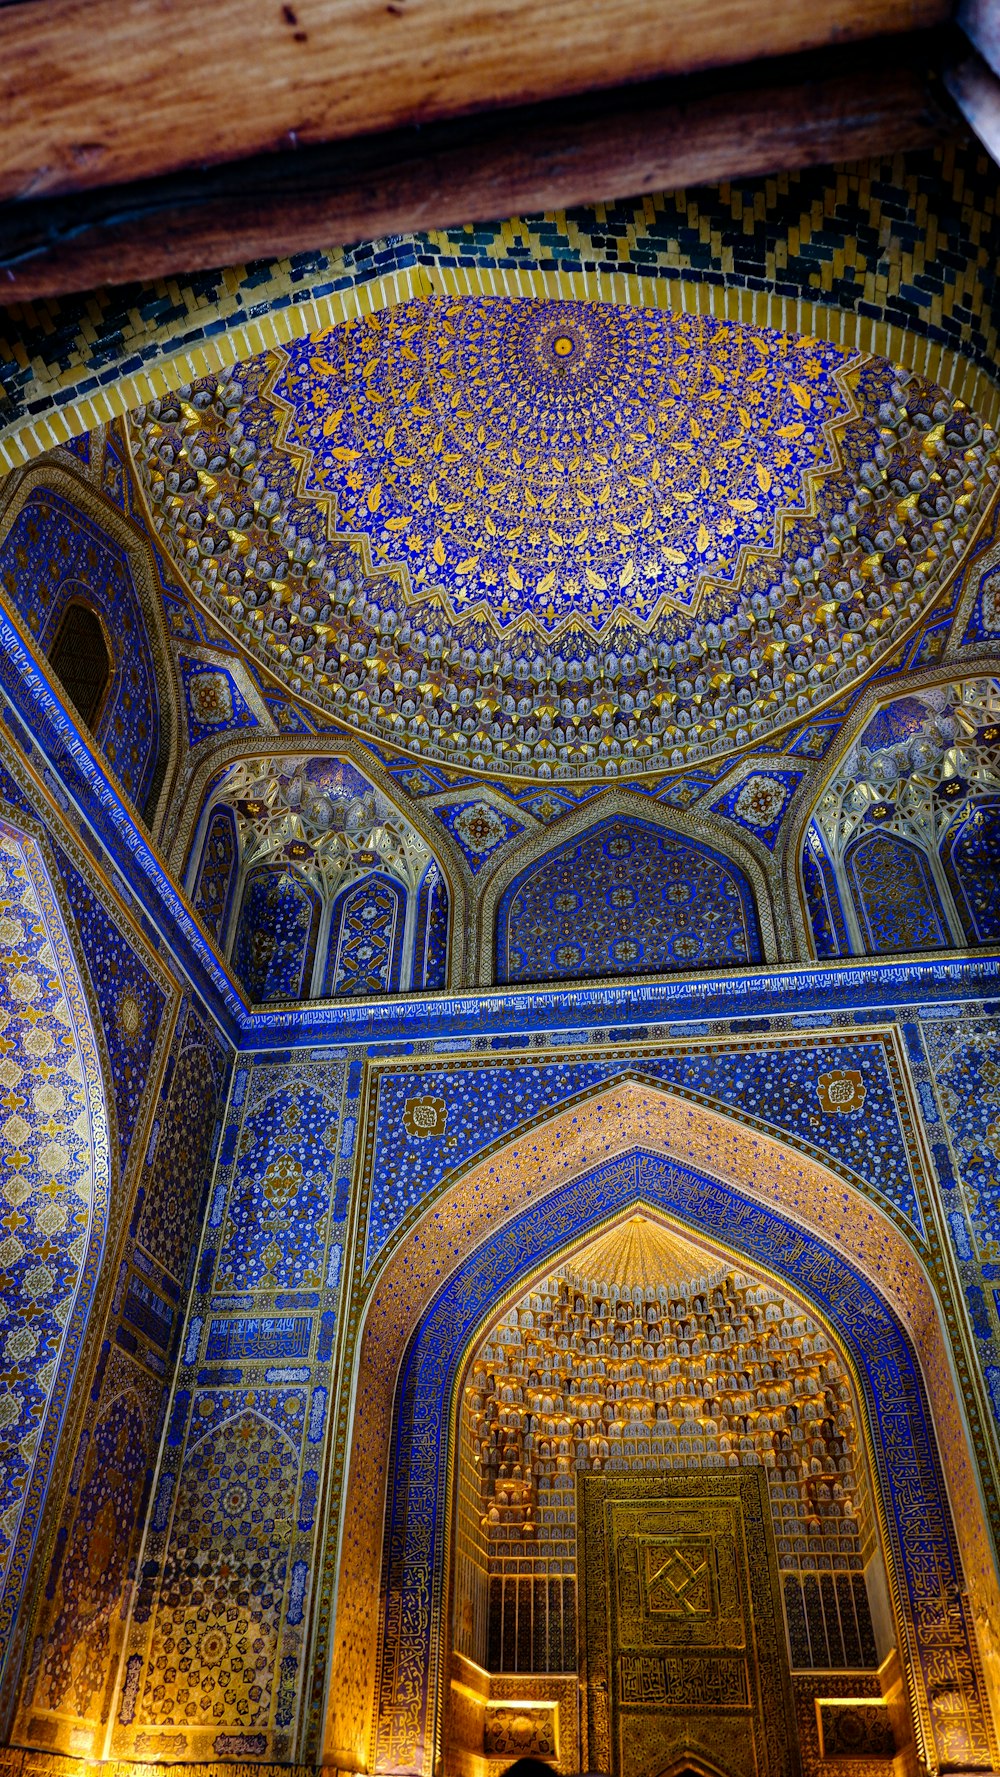 a colorful ceiling with a large arched window with Dome of the Rock in the background